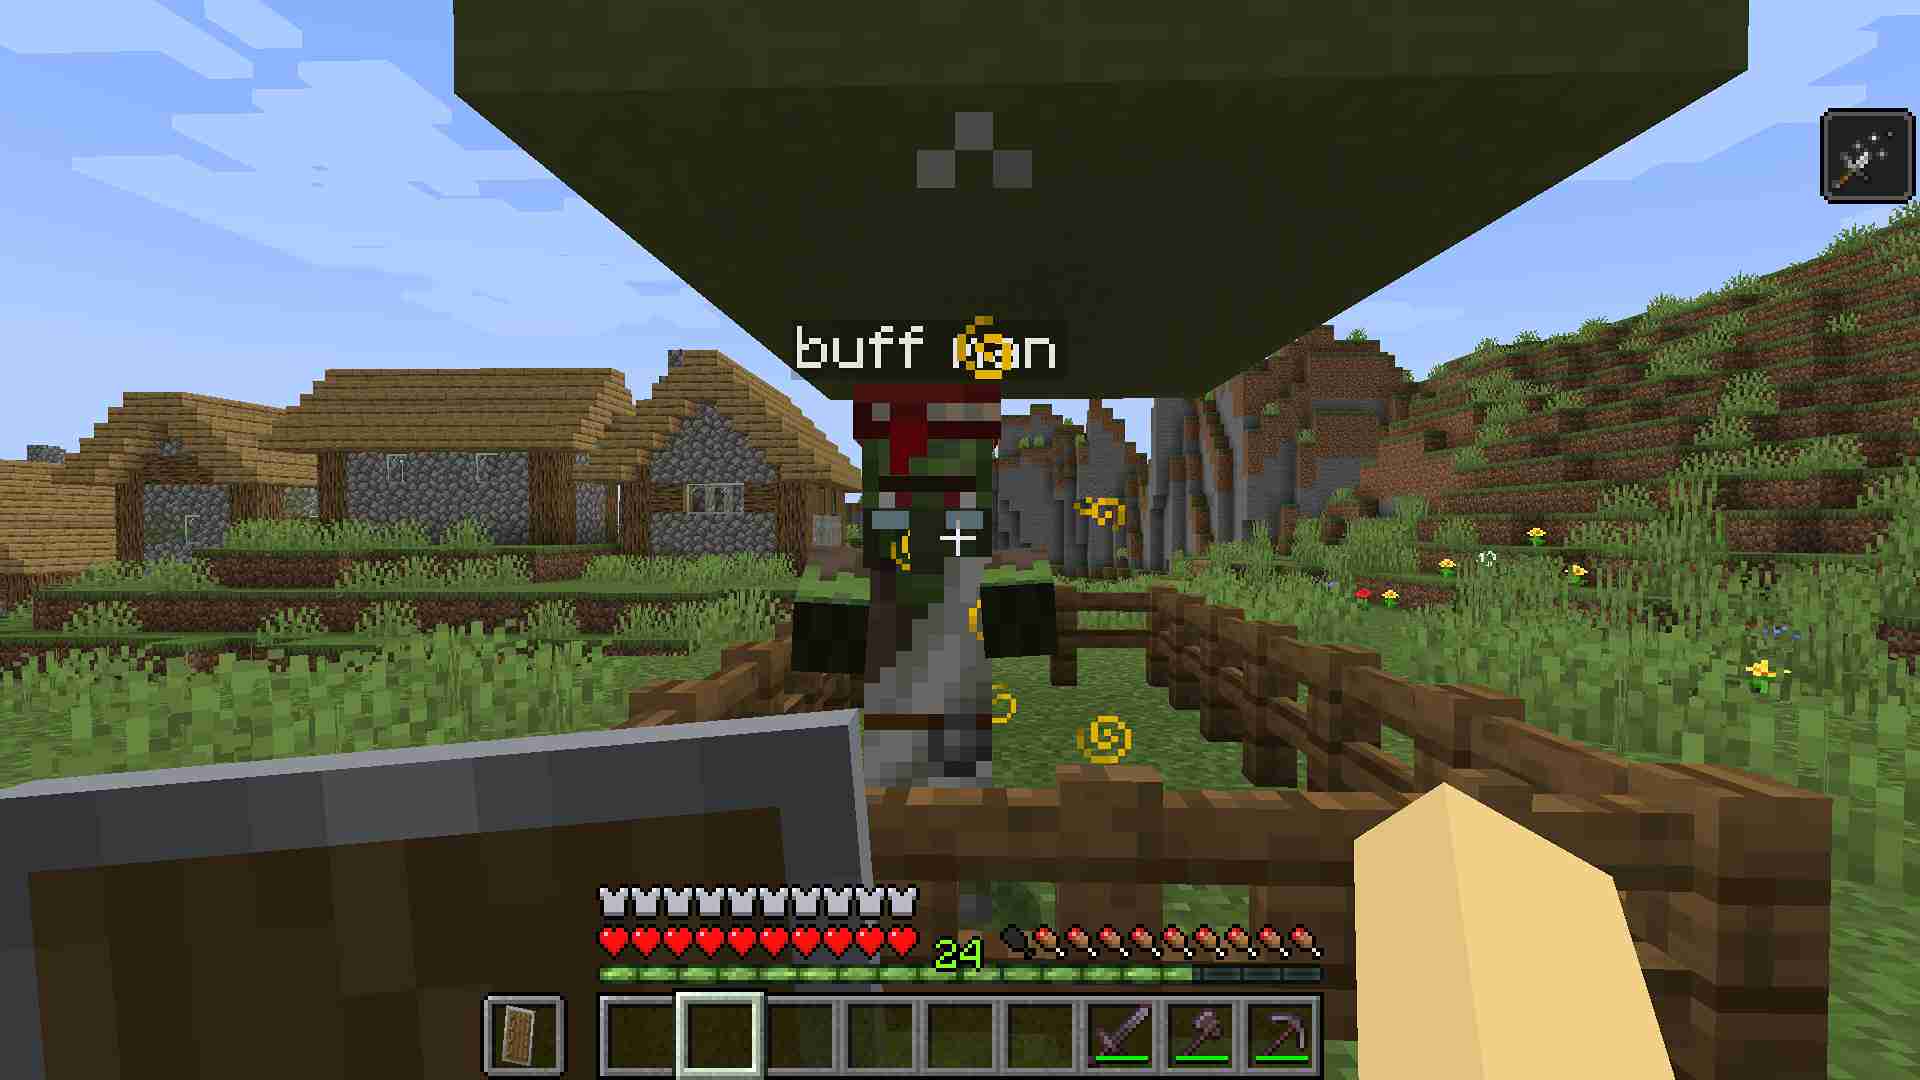 Image of a Zombie Villager being cured in Minecraft.